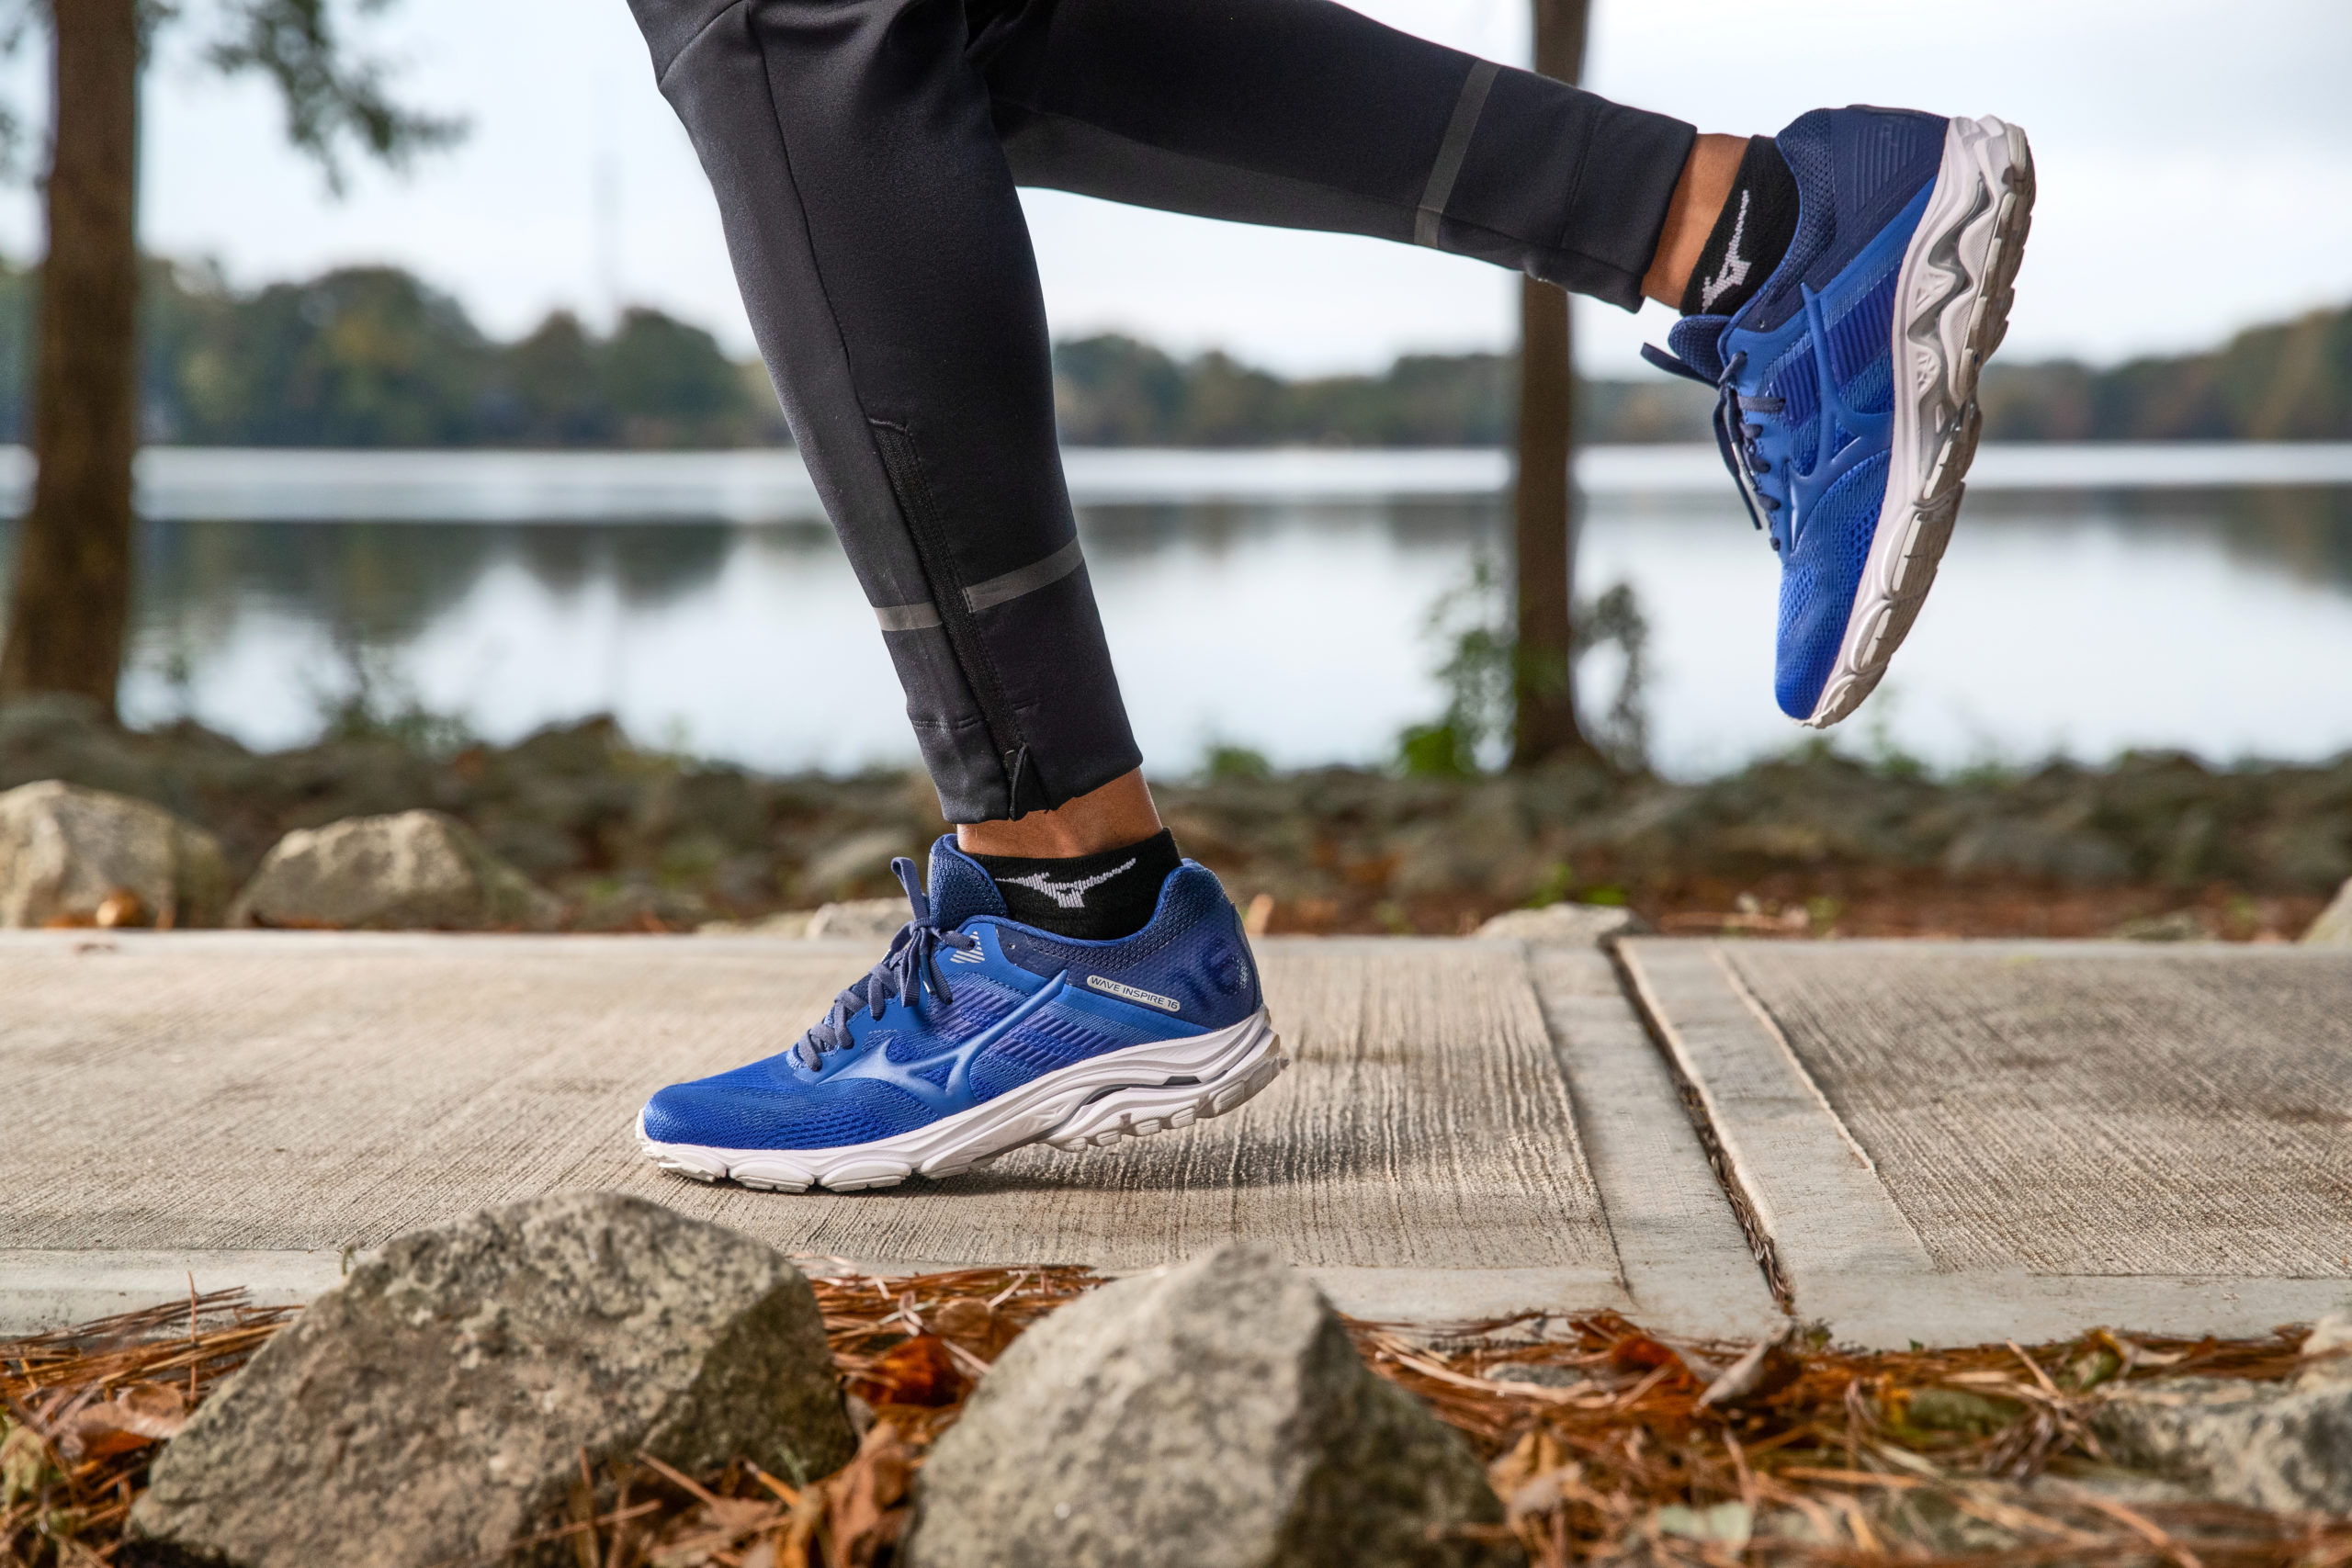 Mizuno USA Increases Syndicated Review Volumes by 89% with PowerReviews -  PowerReviews